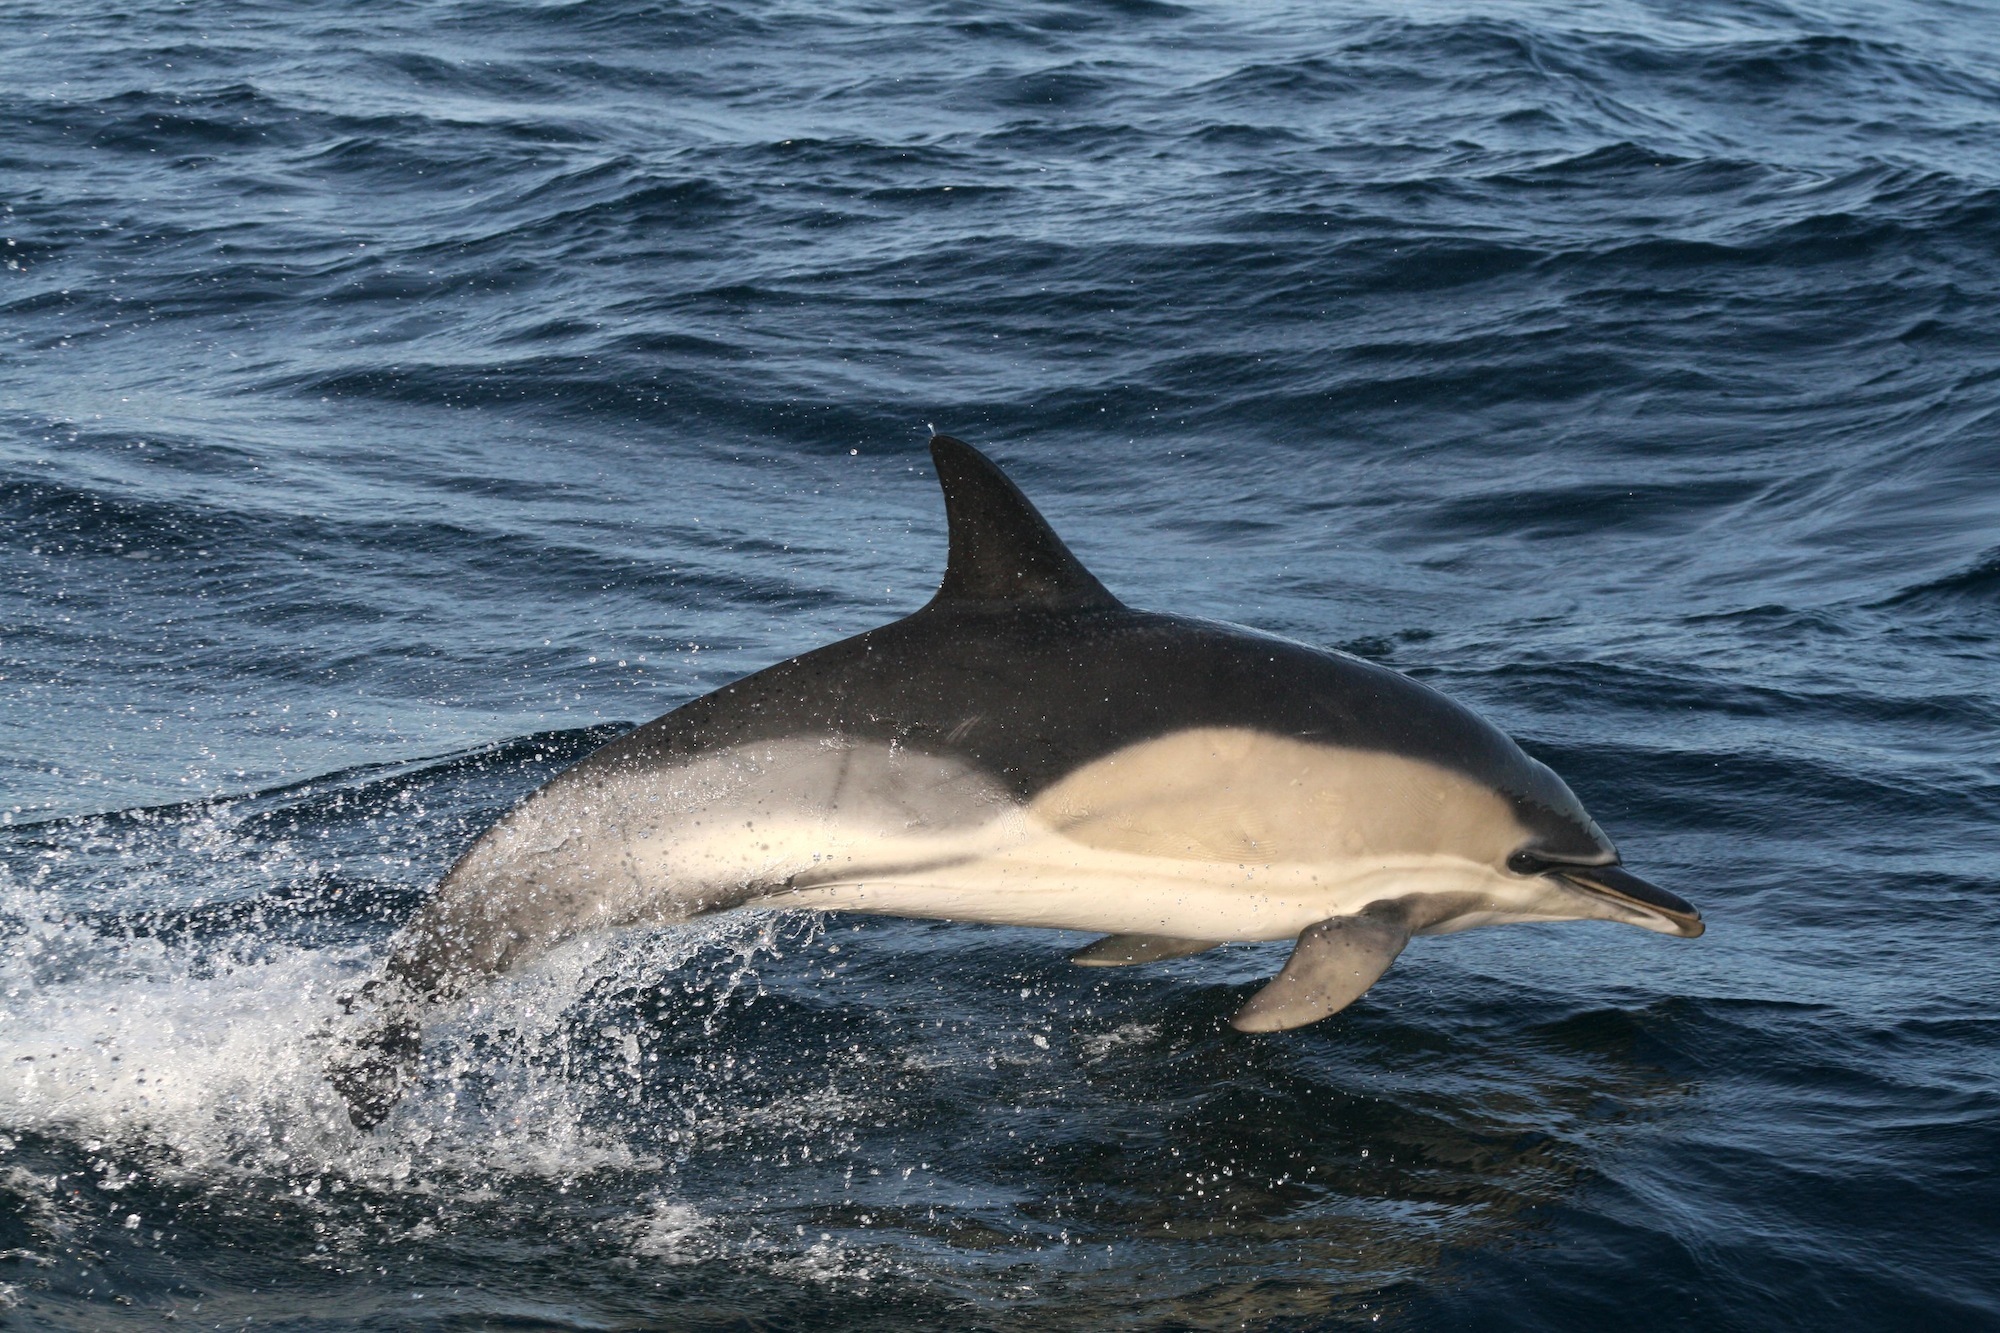 The common dolphin